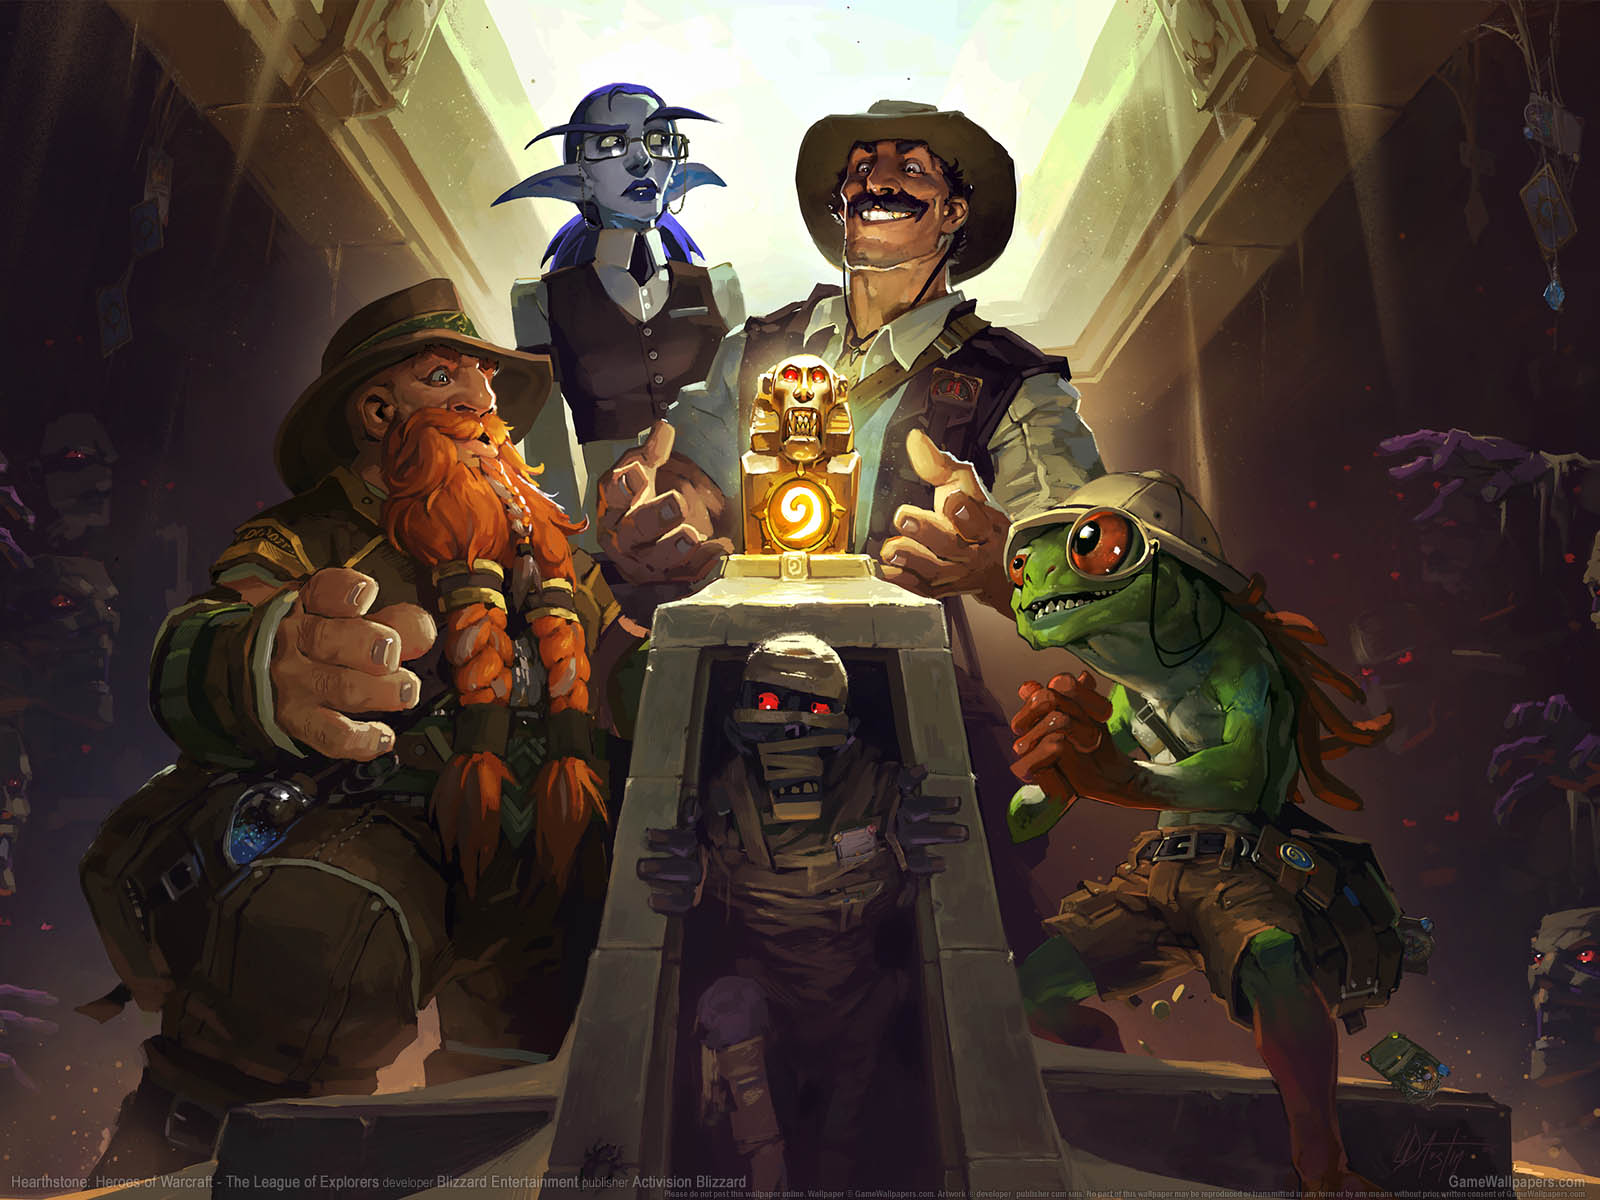 Hearthstone%3A Heroes of Warcraft - The League of Explorers fond d'cran 01 1600x1200